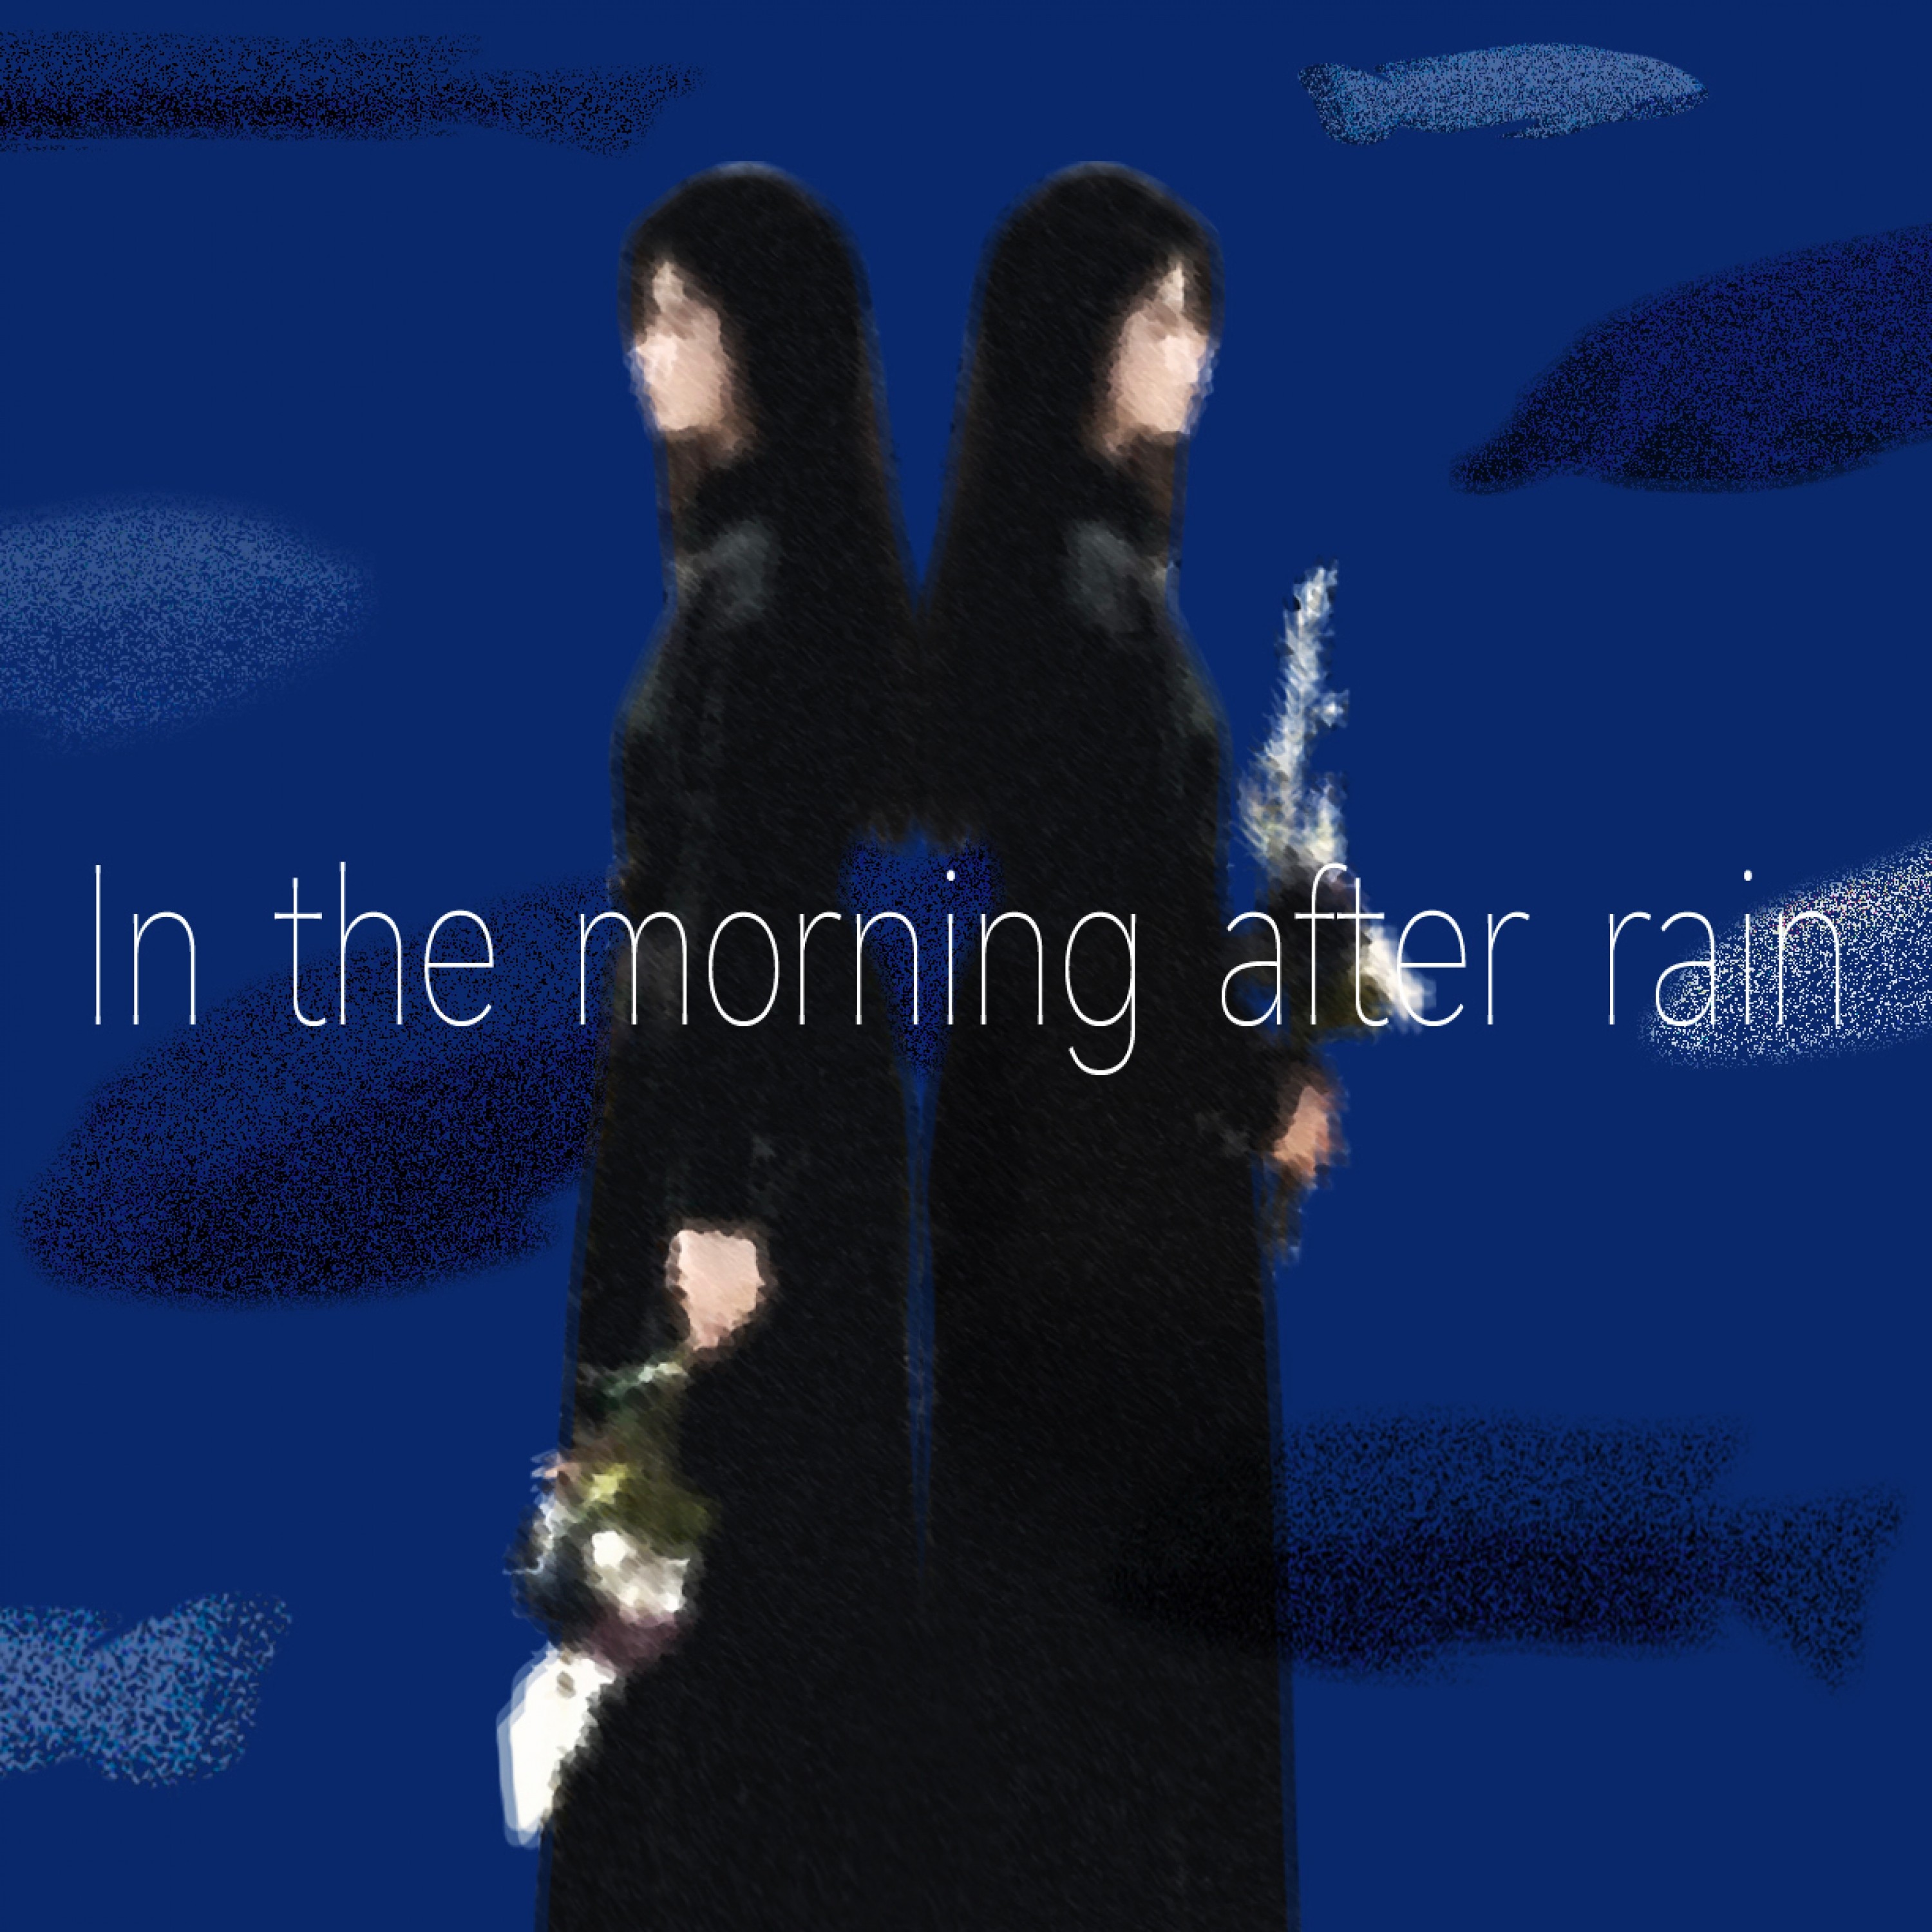 In the morning after rain